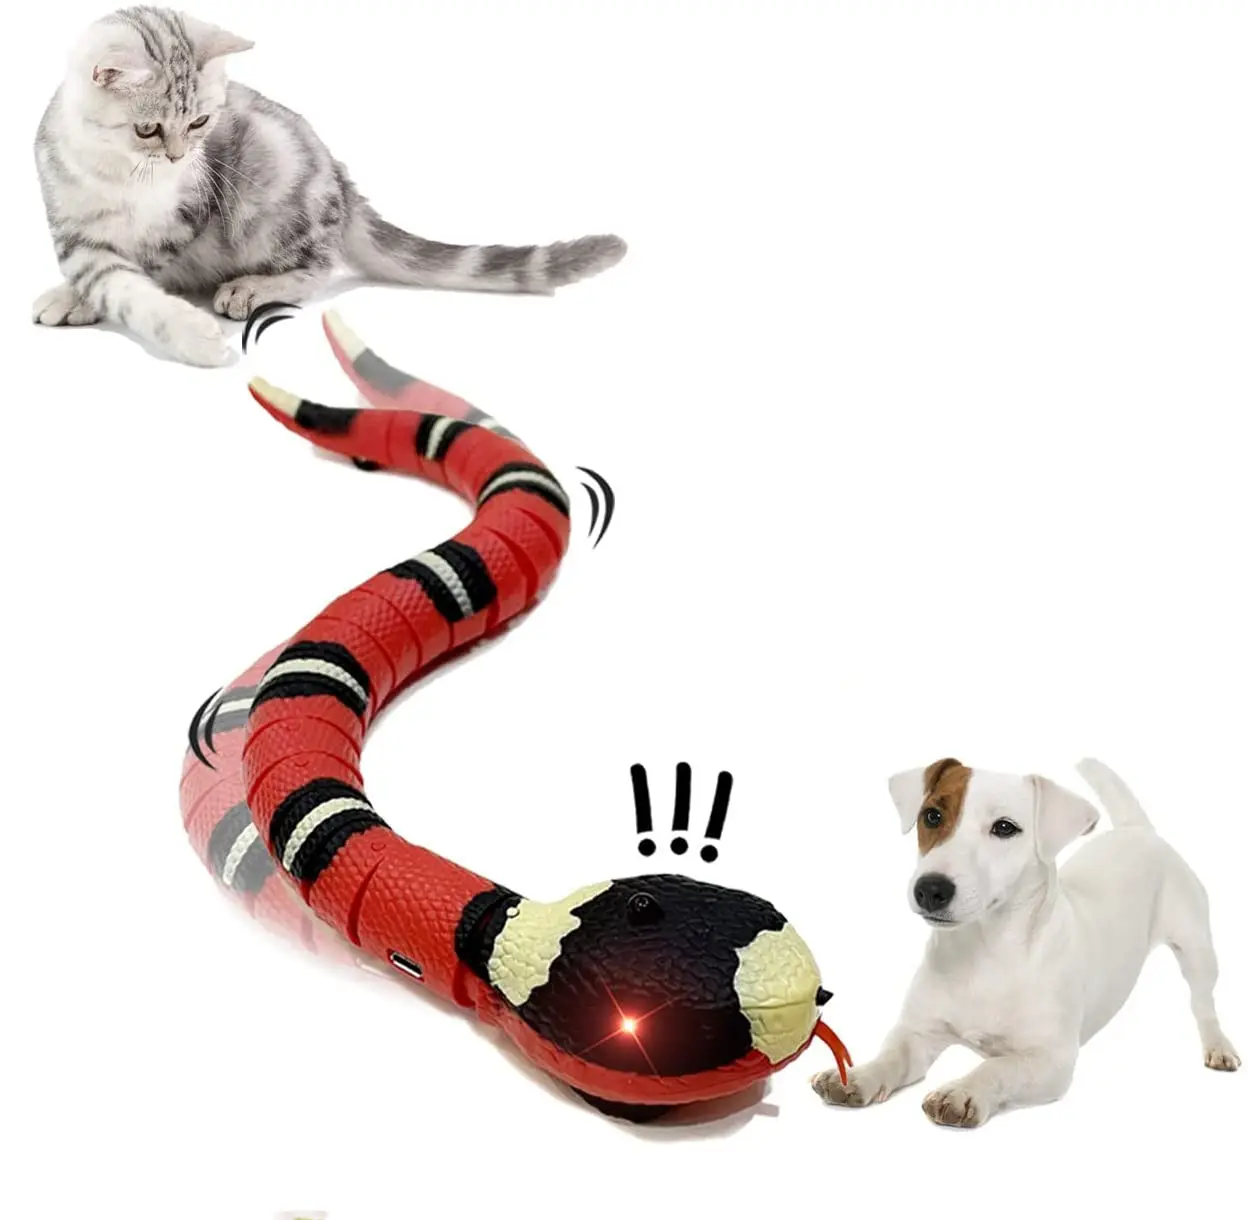 Snake Electronic Smart Sensing Snake Pet Cat Toy for Sensing and Obstacle Avoidance Function Cat Interactive Toys